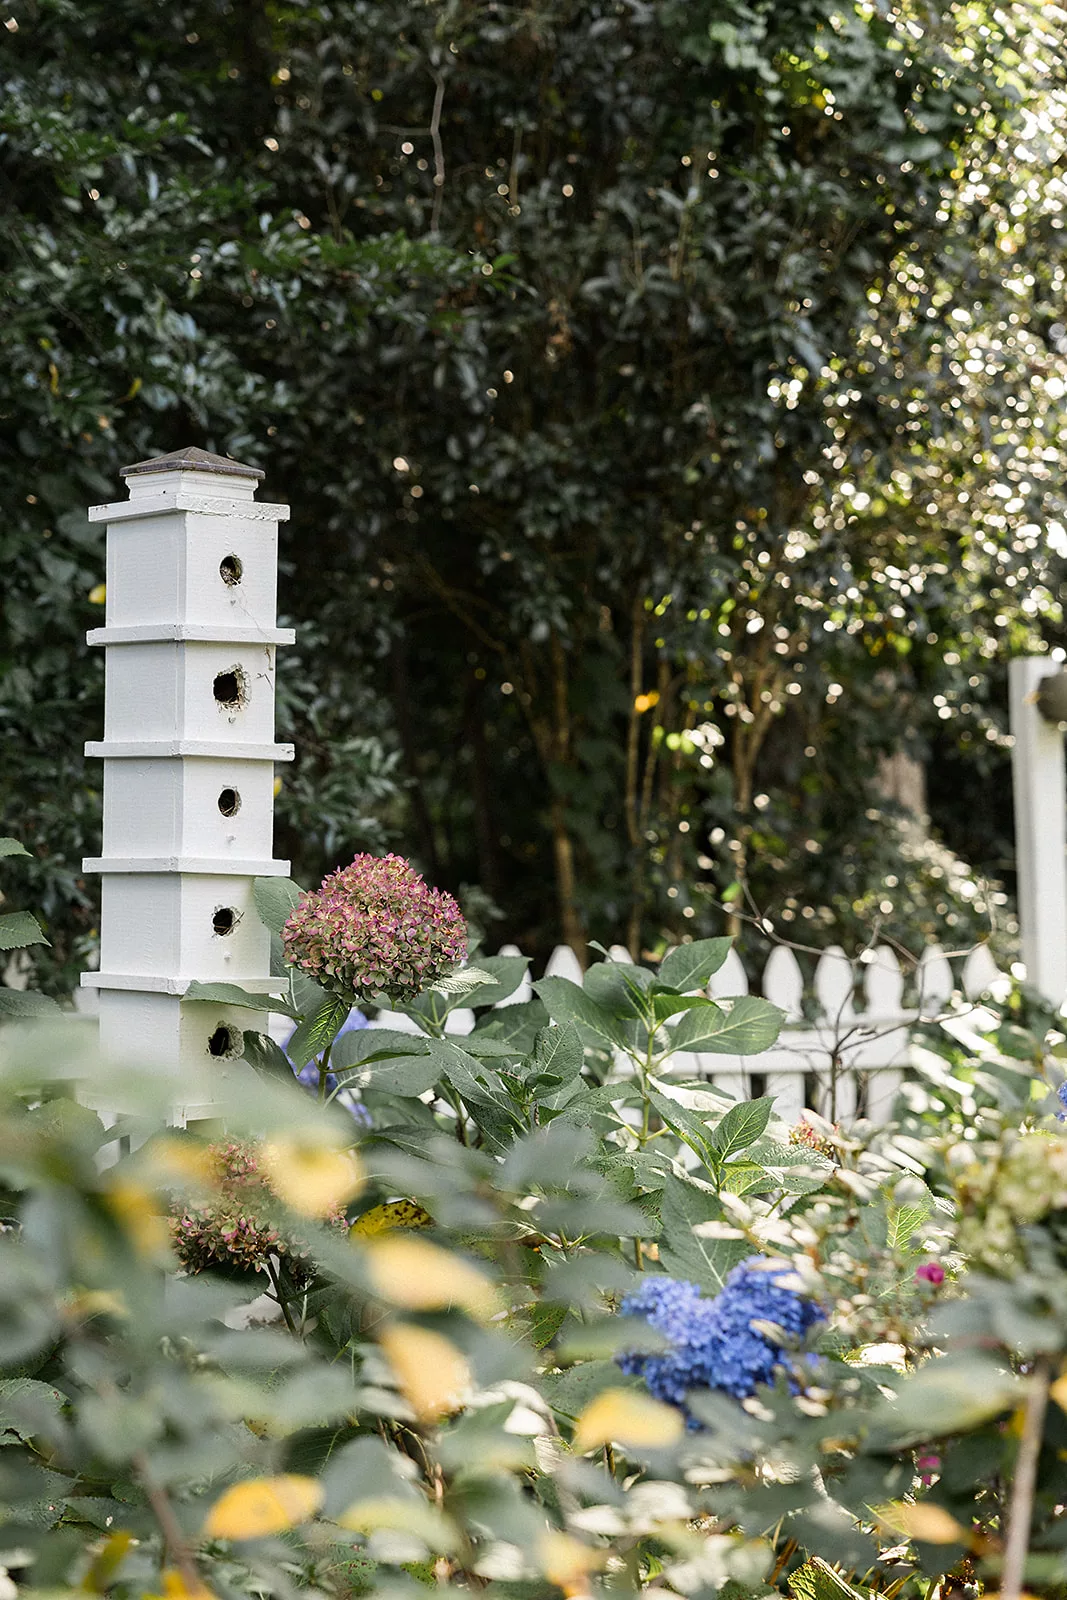 Details of bird houses sitting in flowers at the Wildflower 301 gardens